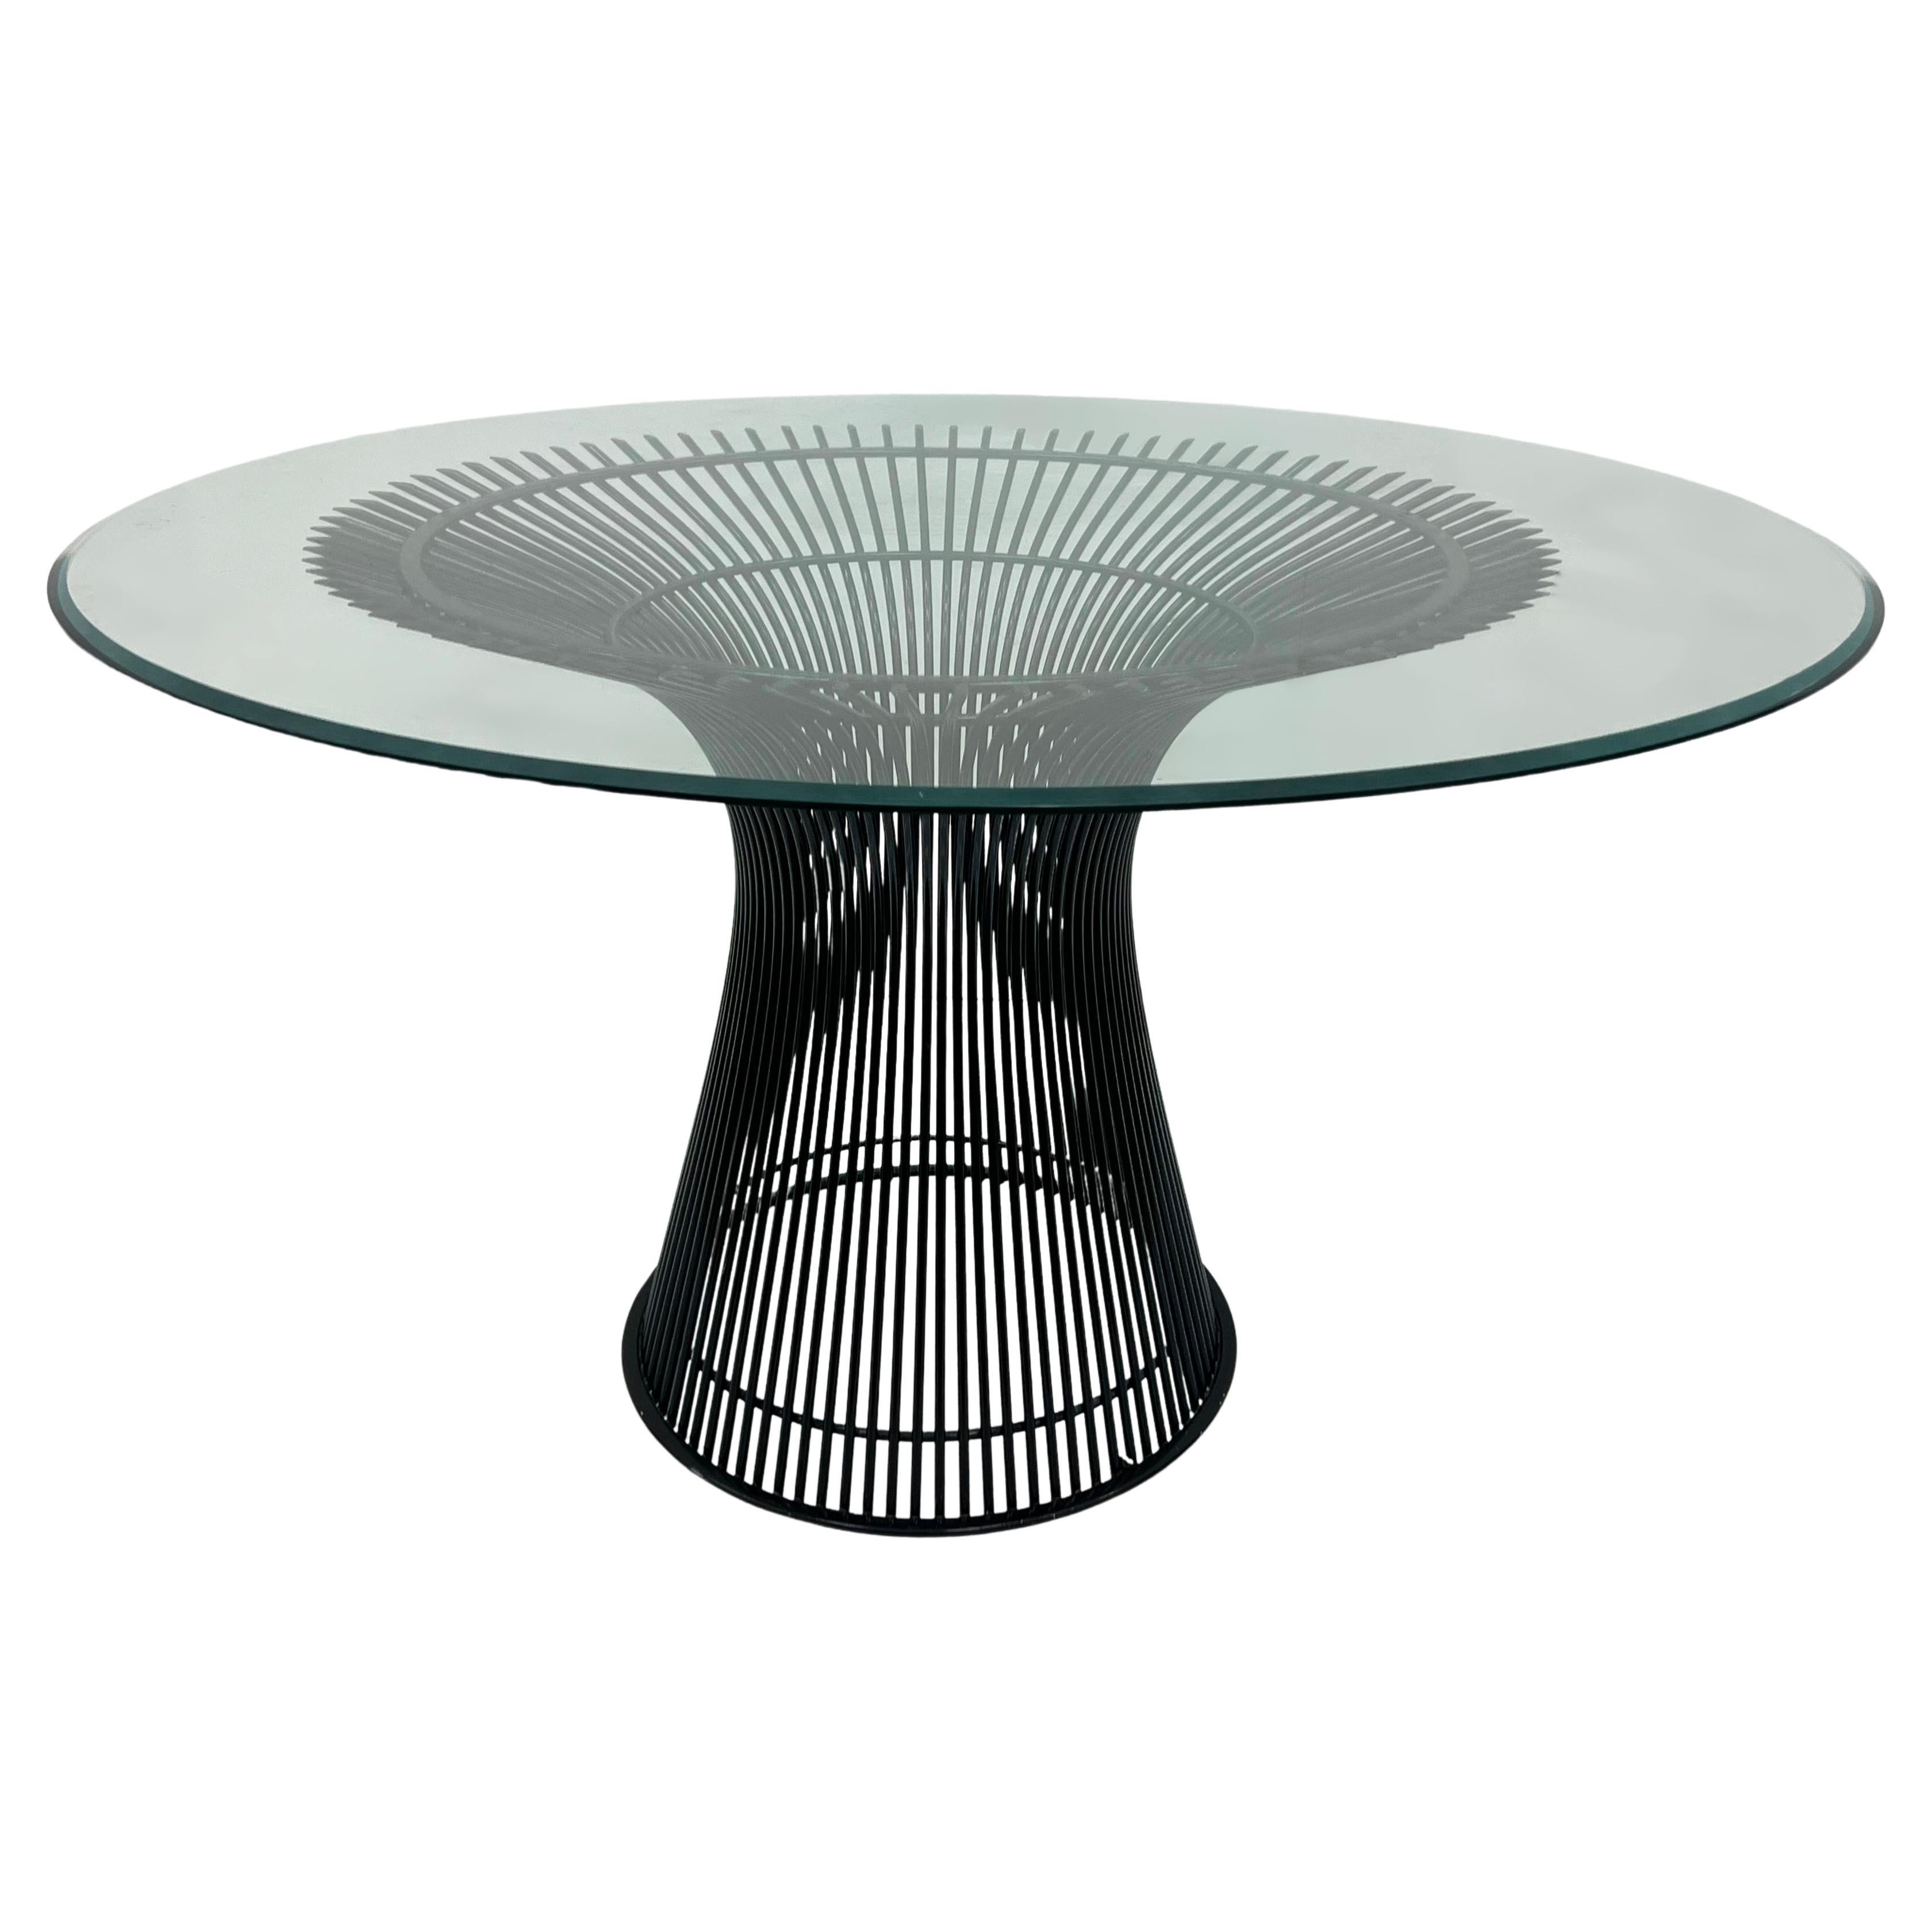 Mid-Century Modern Warren Platner Knoll Steel Dining Table with Glass Top